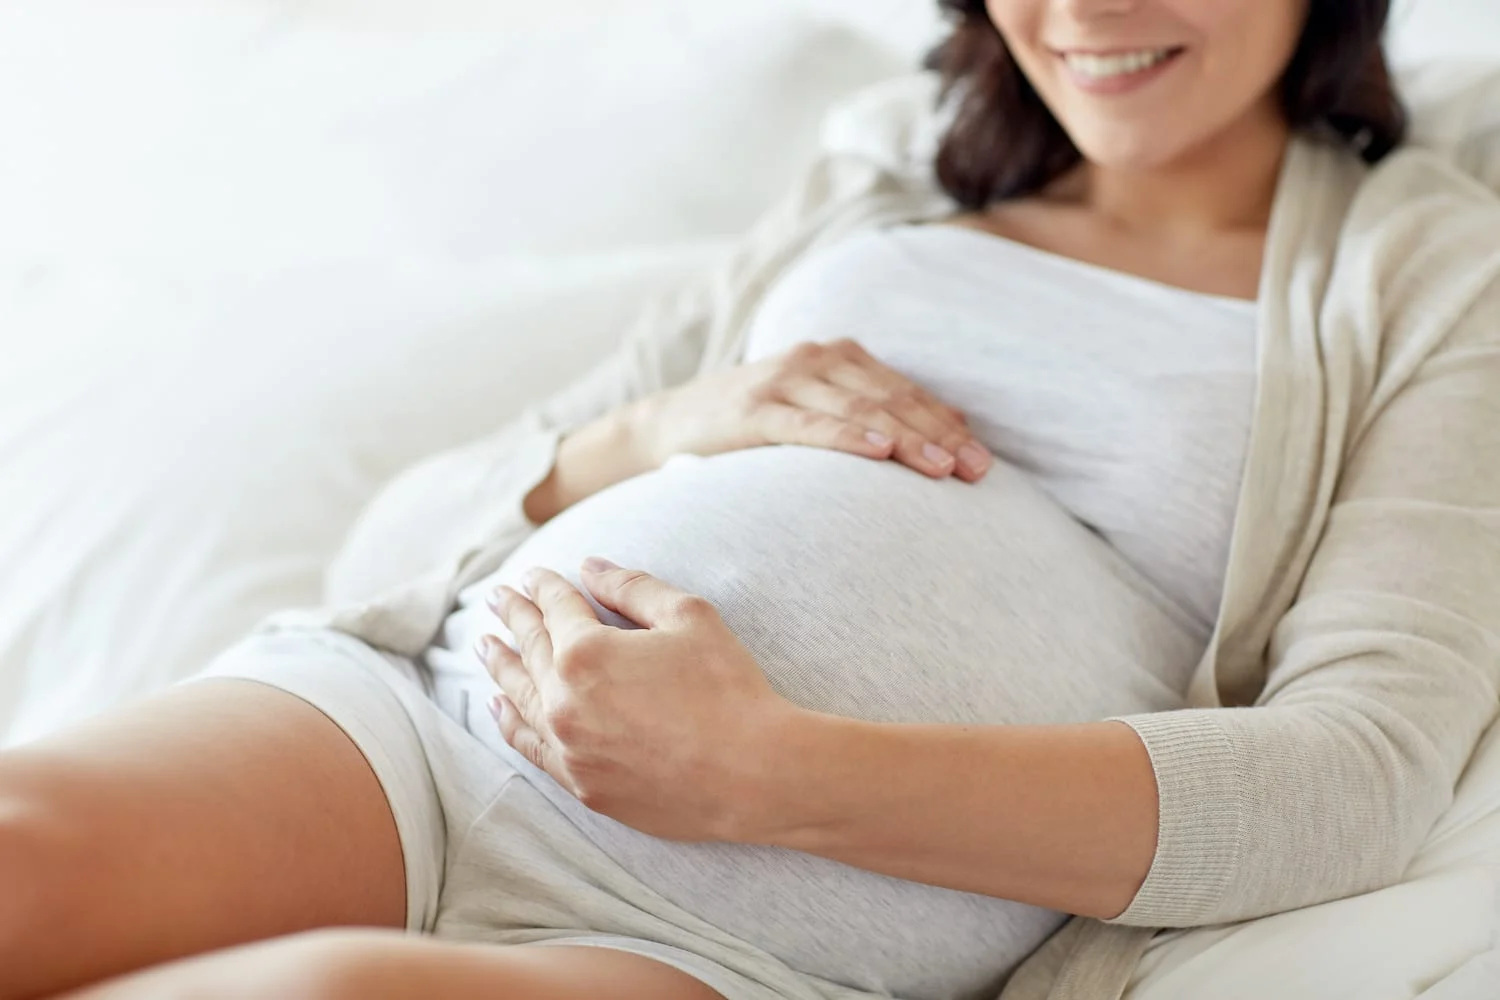 Featured image for “Everything You Need to Know About Dental Care During Pregnancy”